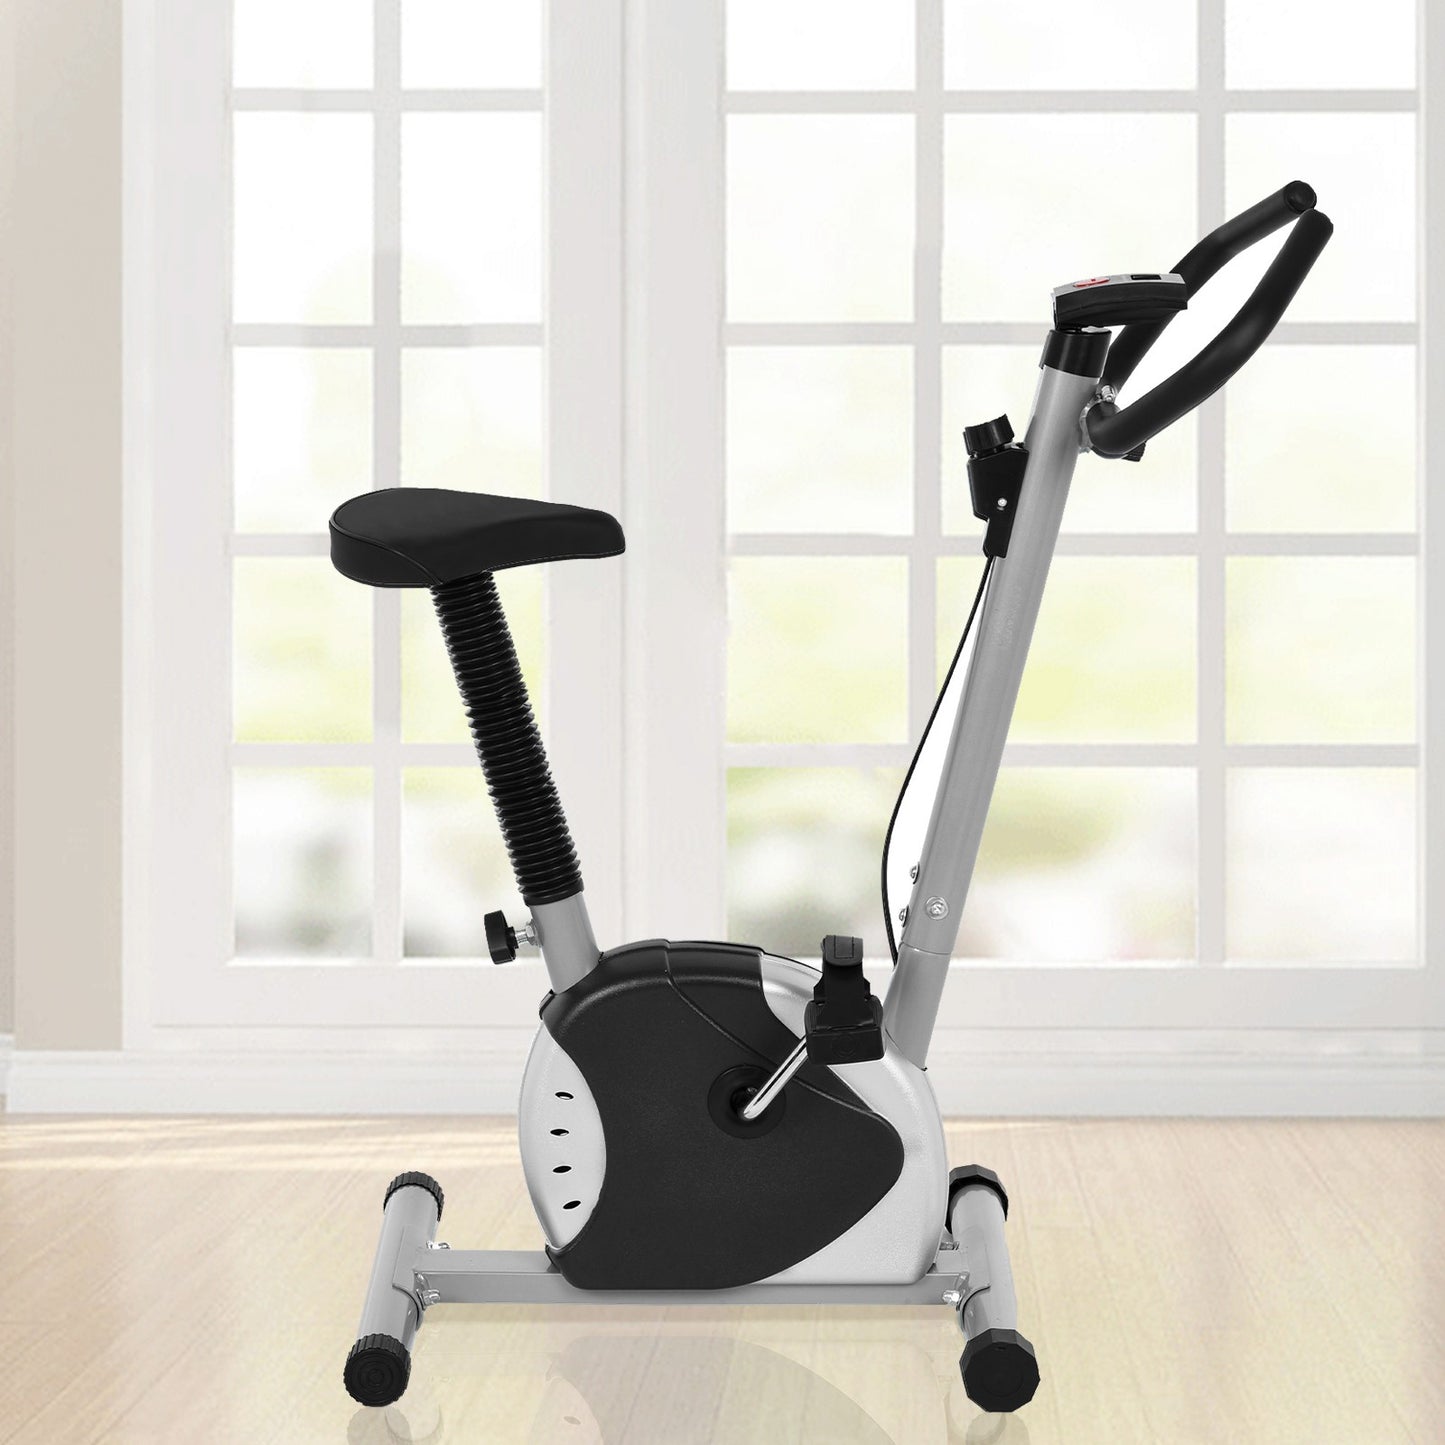 Cycling Exercise Bike Stationary Fitness Cardio